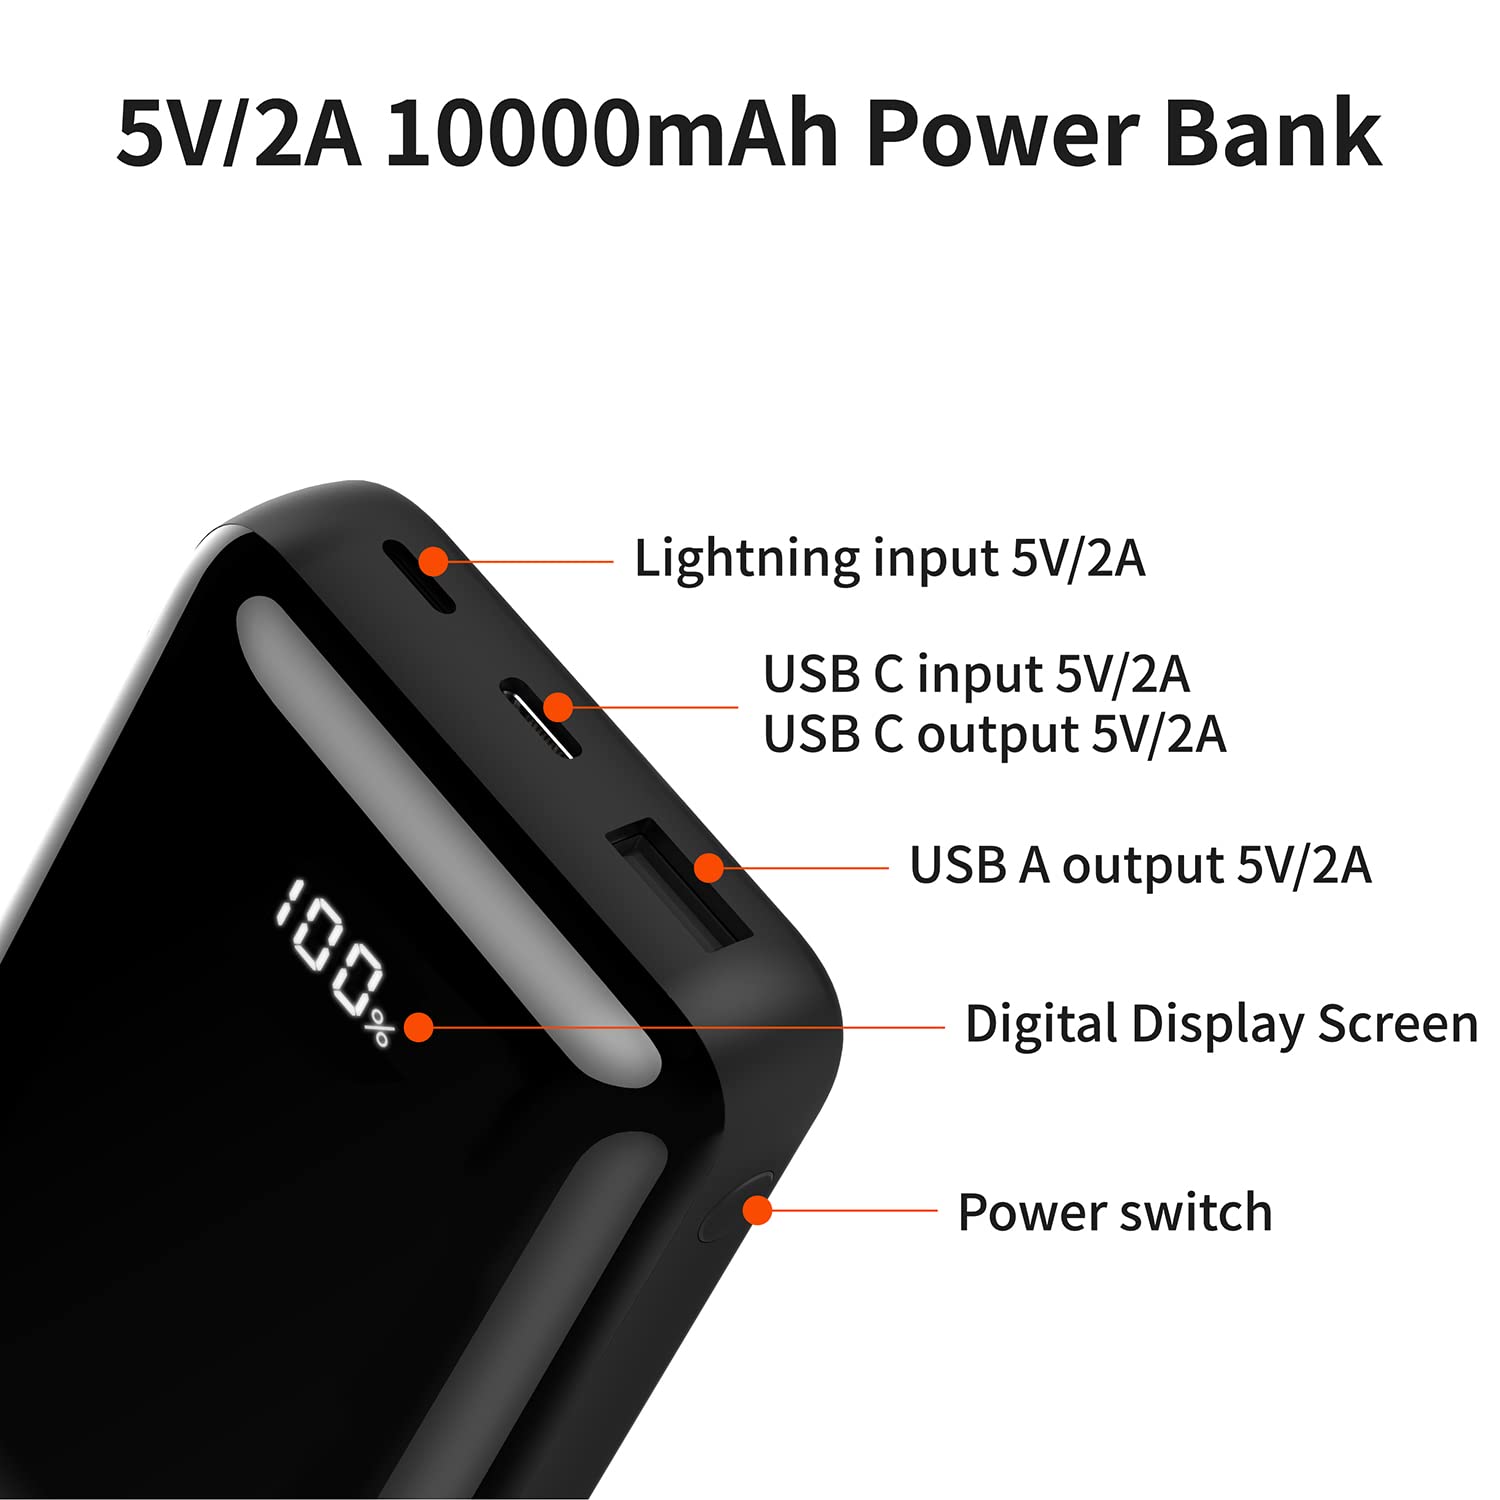 OKZU 5V 2A Power Bank for Heated Vest, Jacket, Stadium Seats, Chair Battery Pack, 10000mAh Packet Size LED Display Portable Charge for Heated Clothing, USB Heated Blanket, Coat